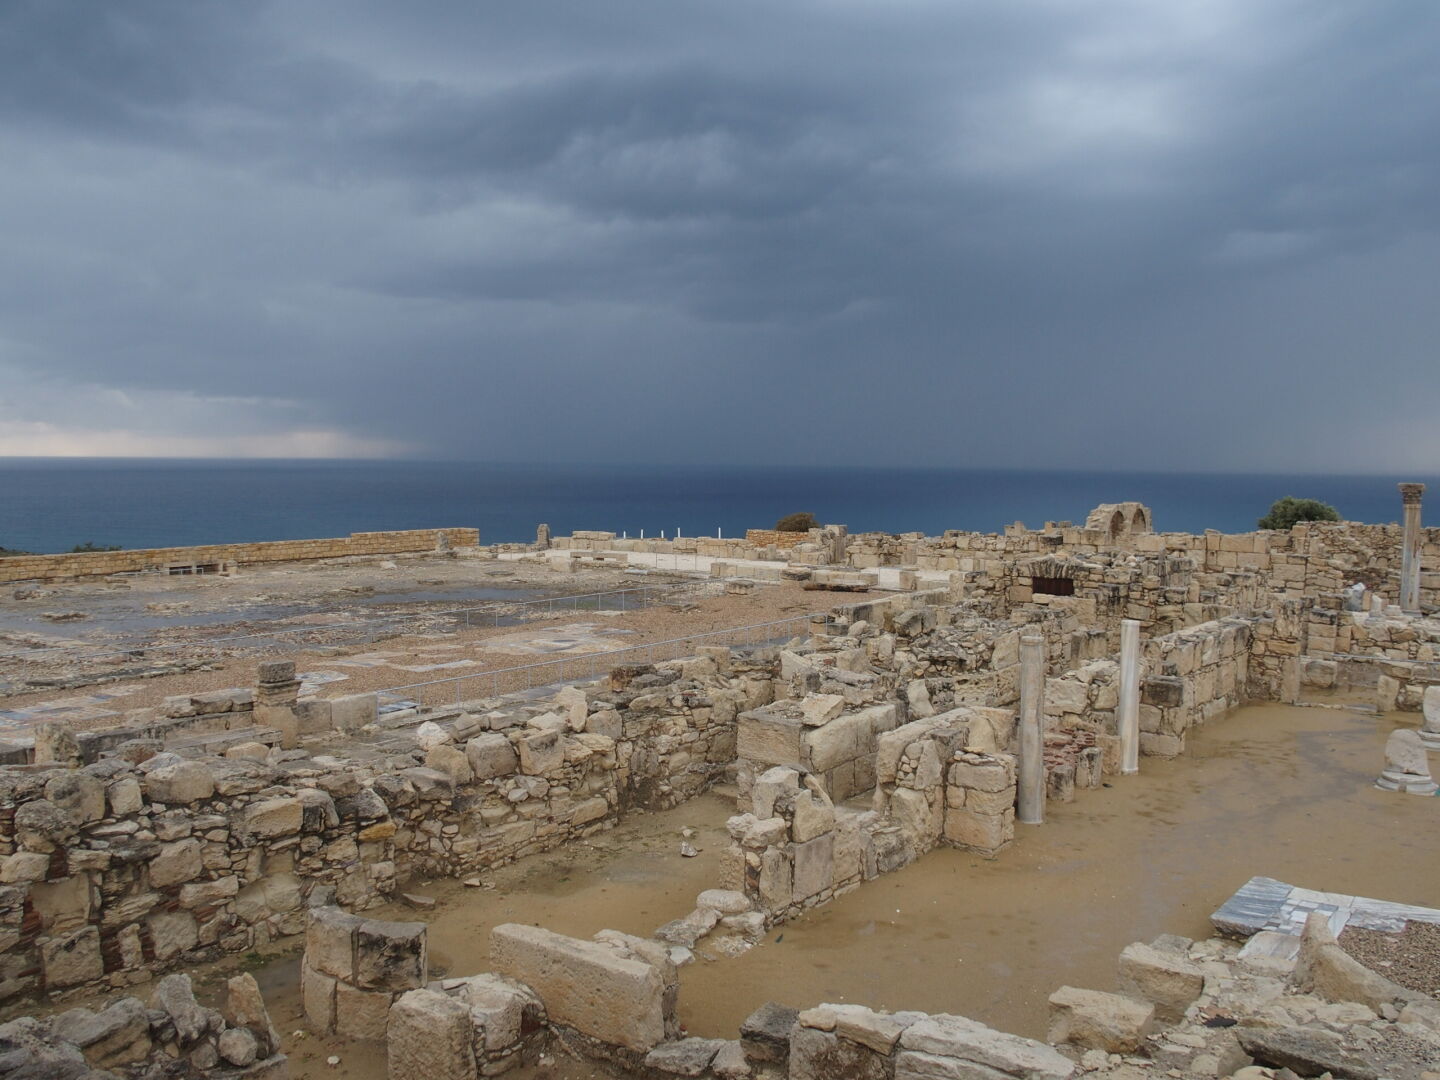 The remains of a basilika were very wet because of the rain. I wonder whether the drainage network worked better in ancient times?